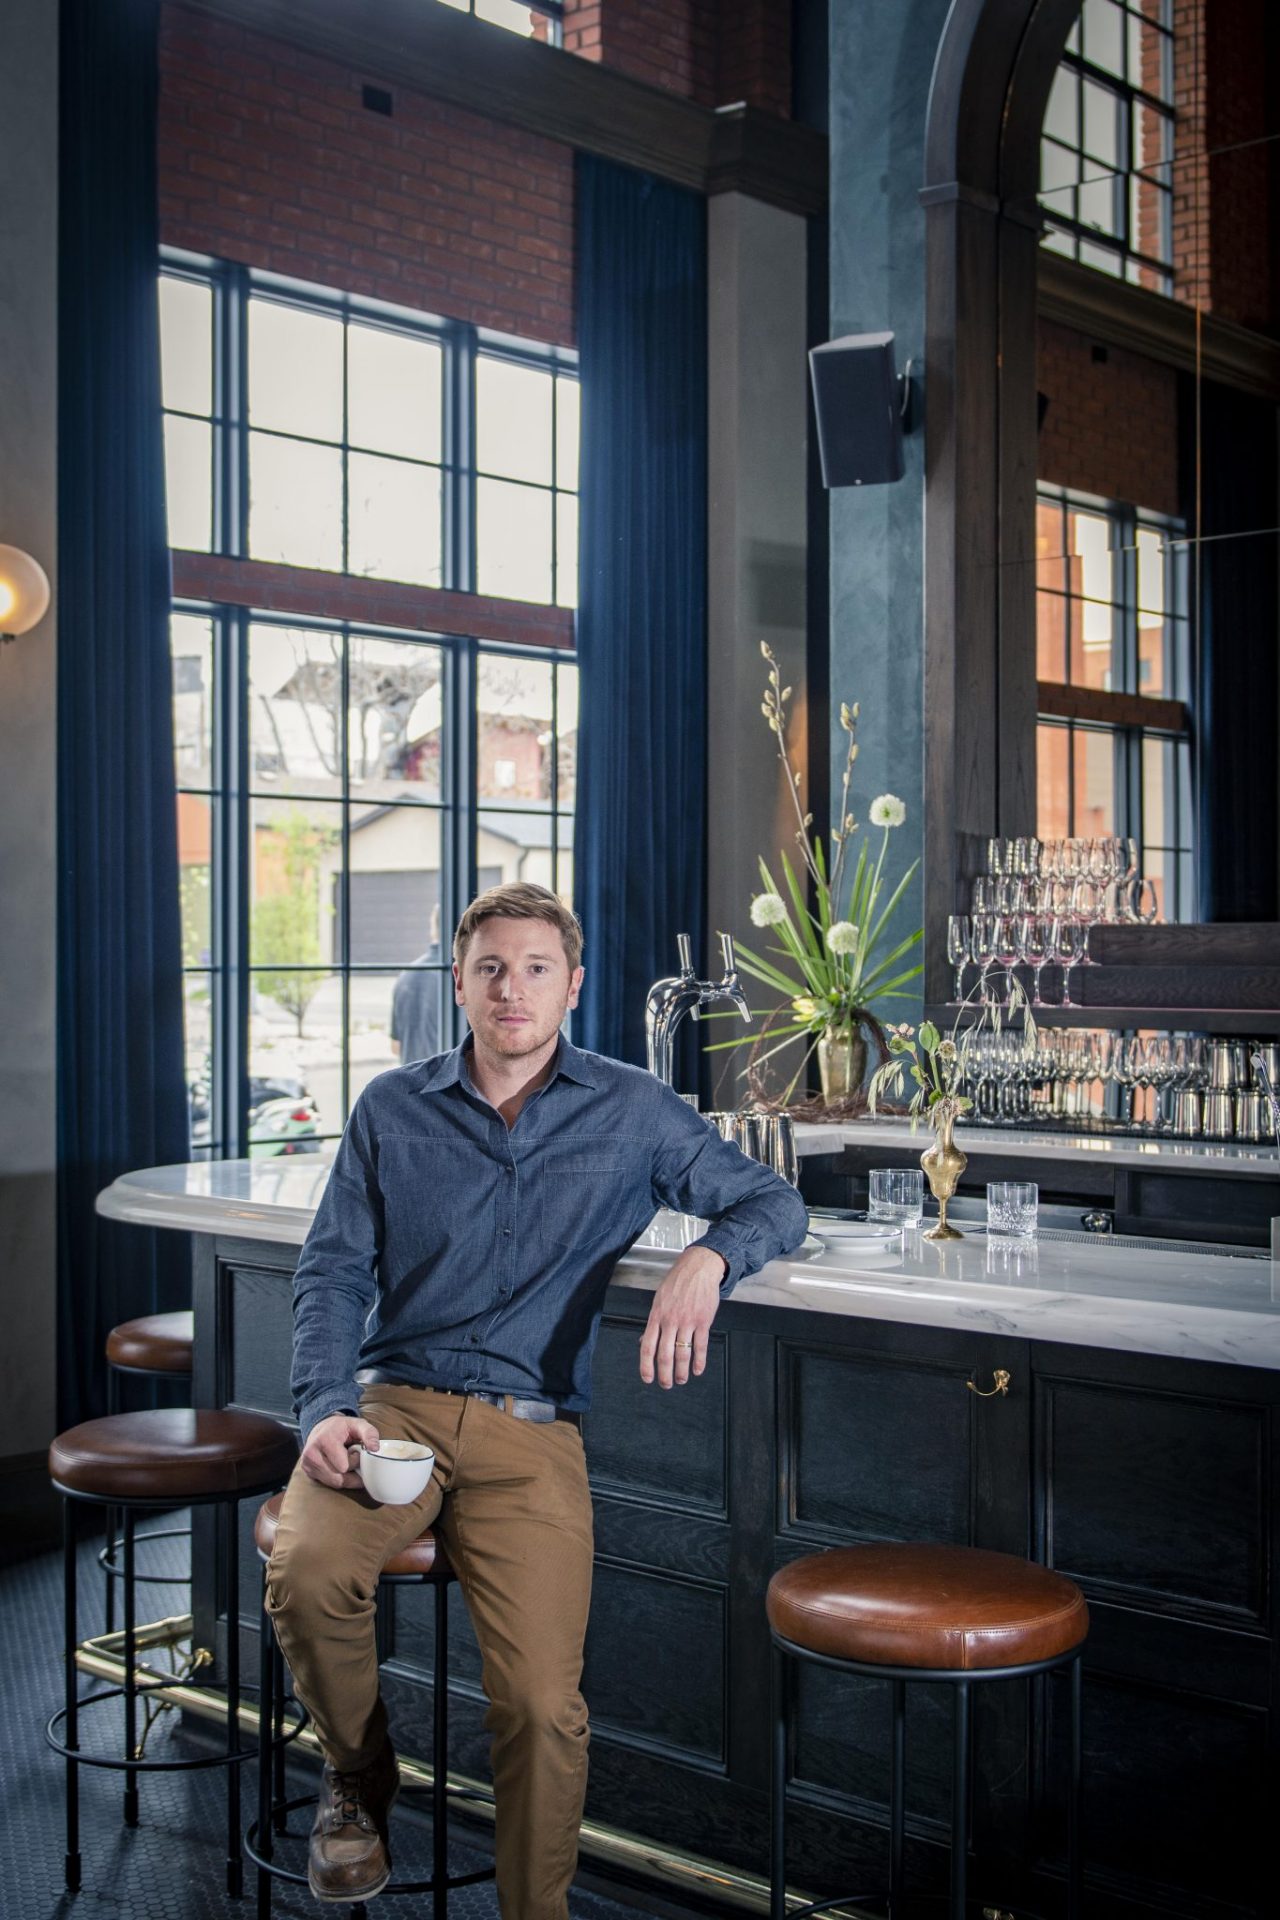 Ryan Diggins on Becoming a Hotelier